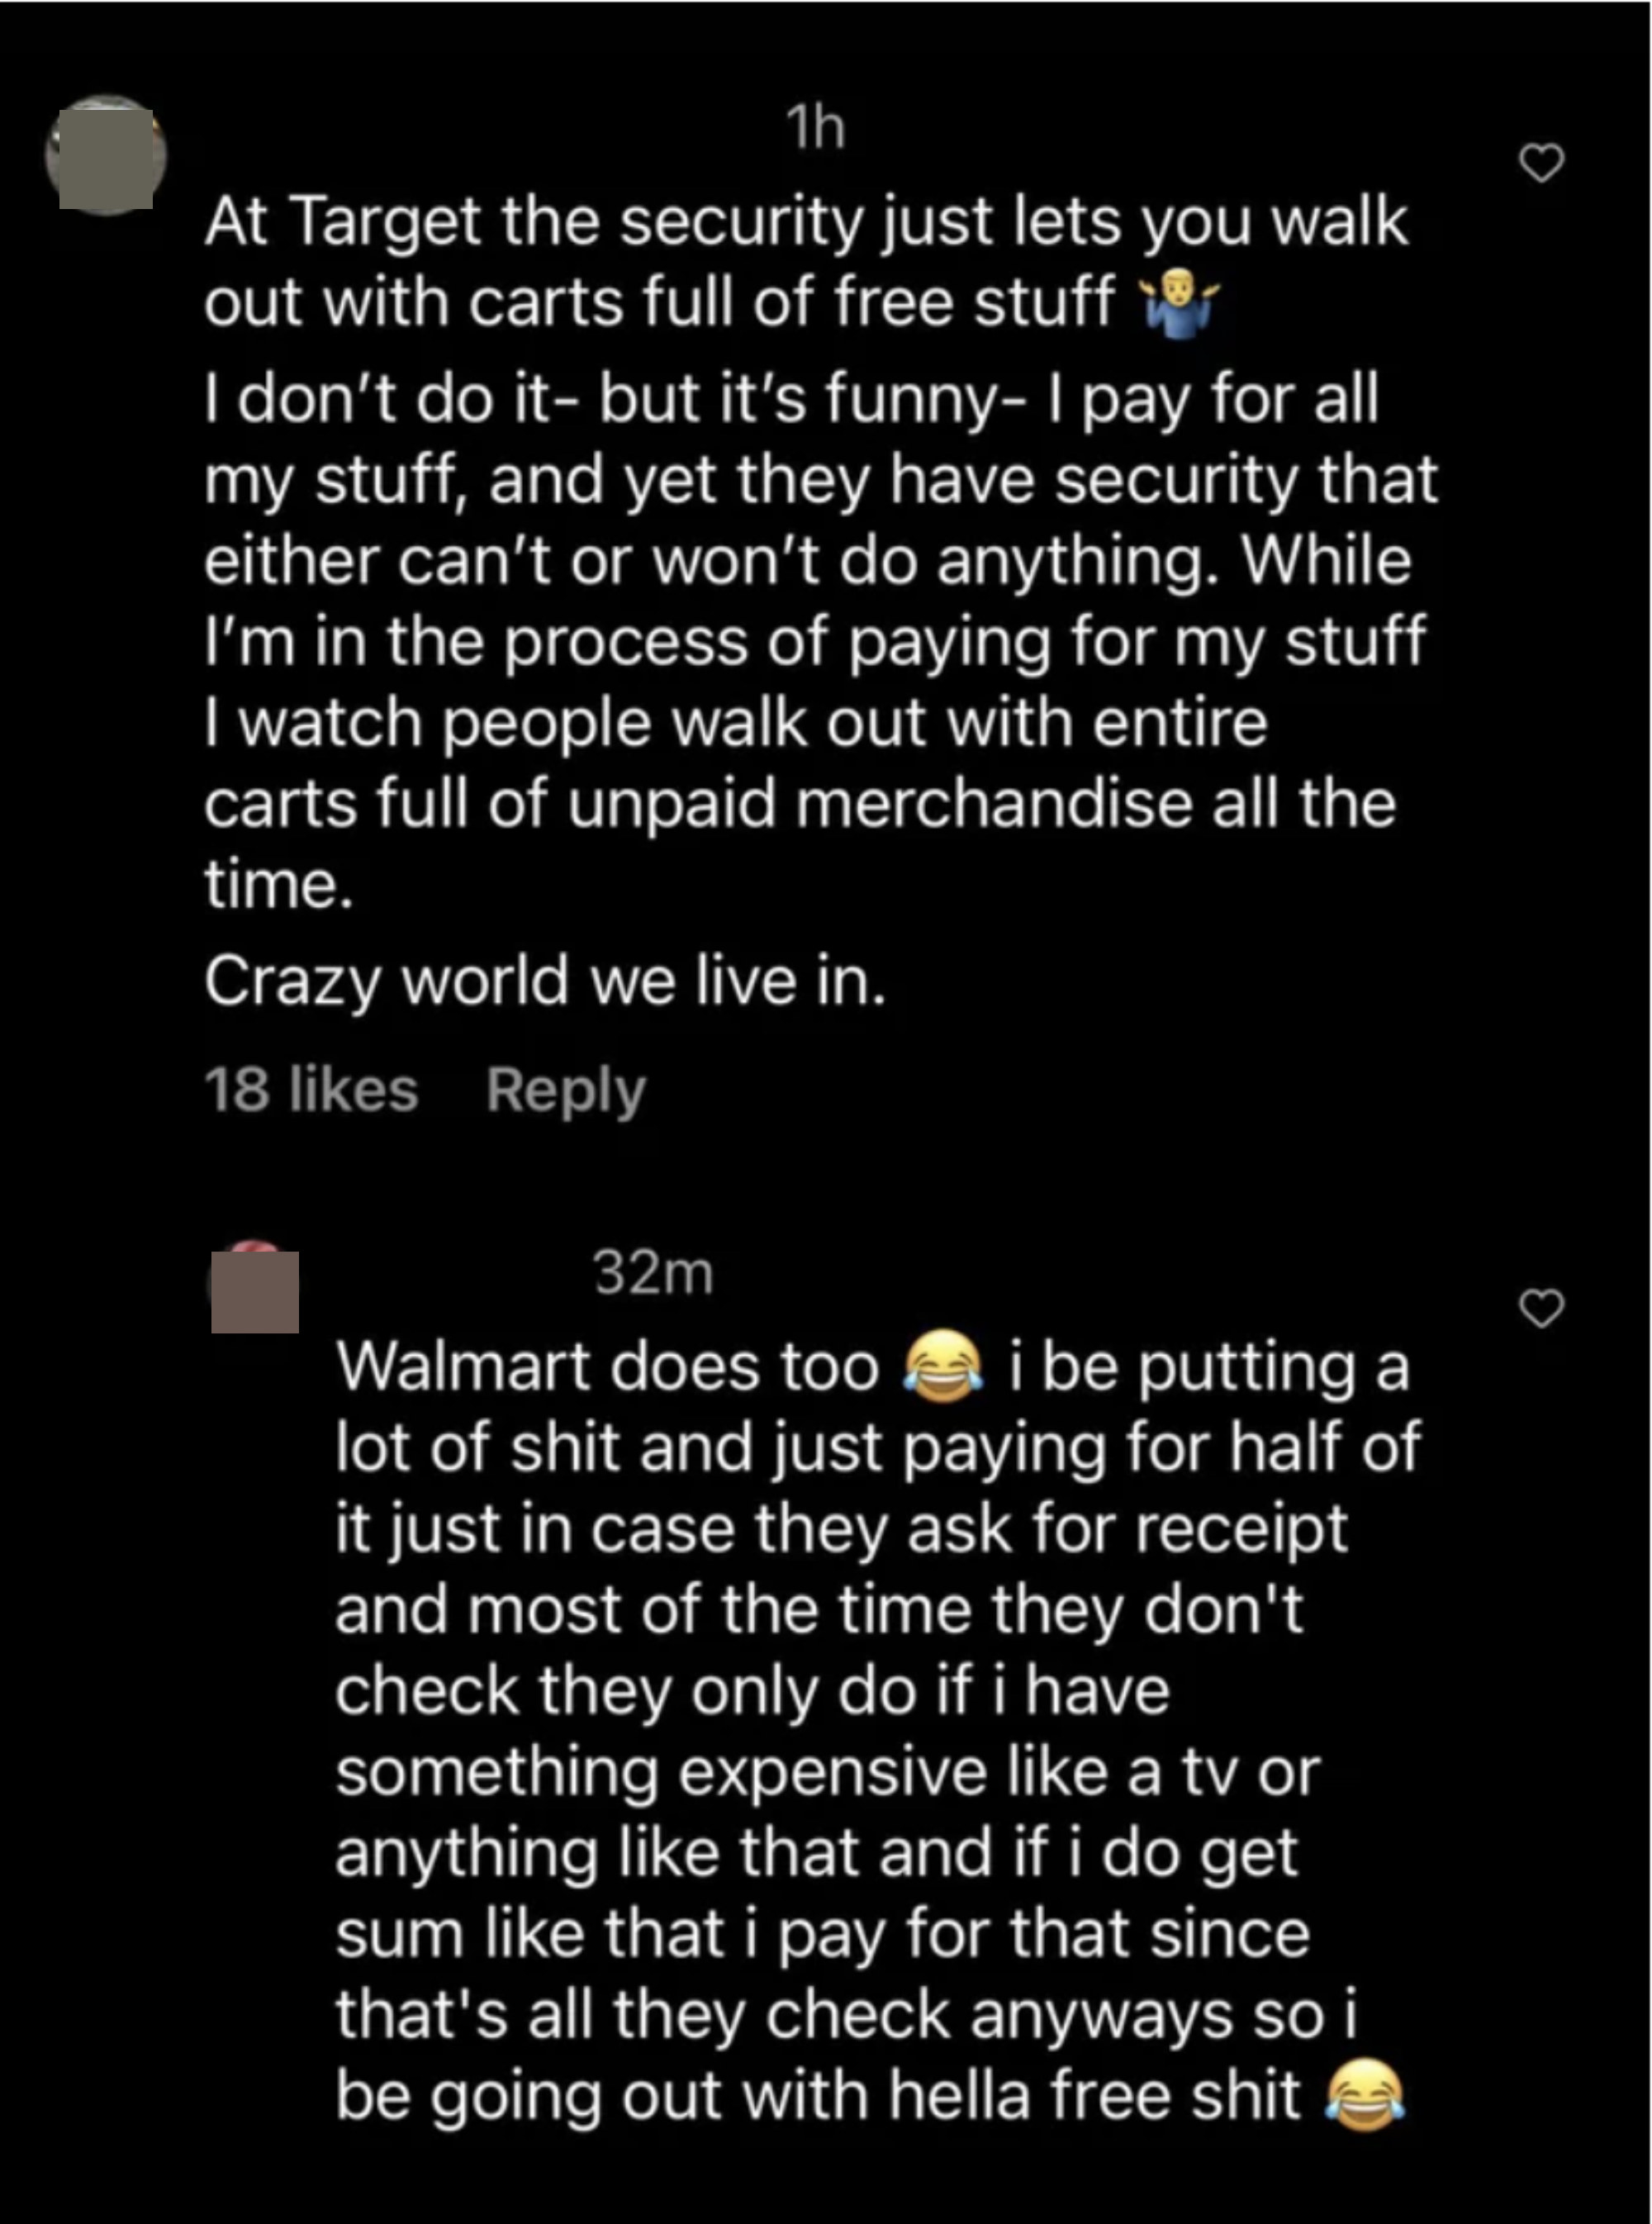 someone responding that they steal from walmart all the time